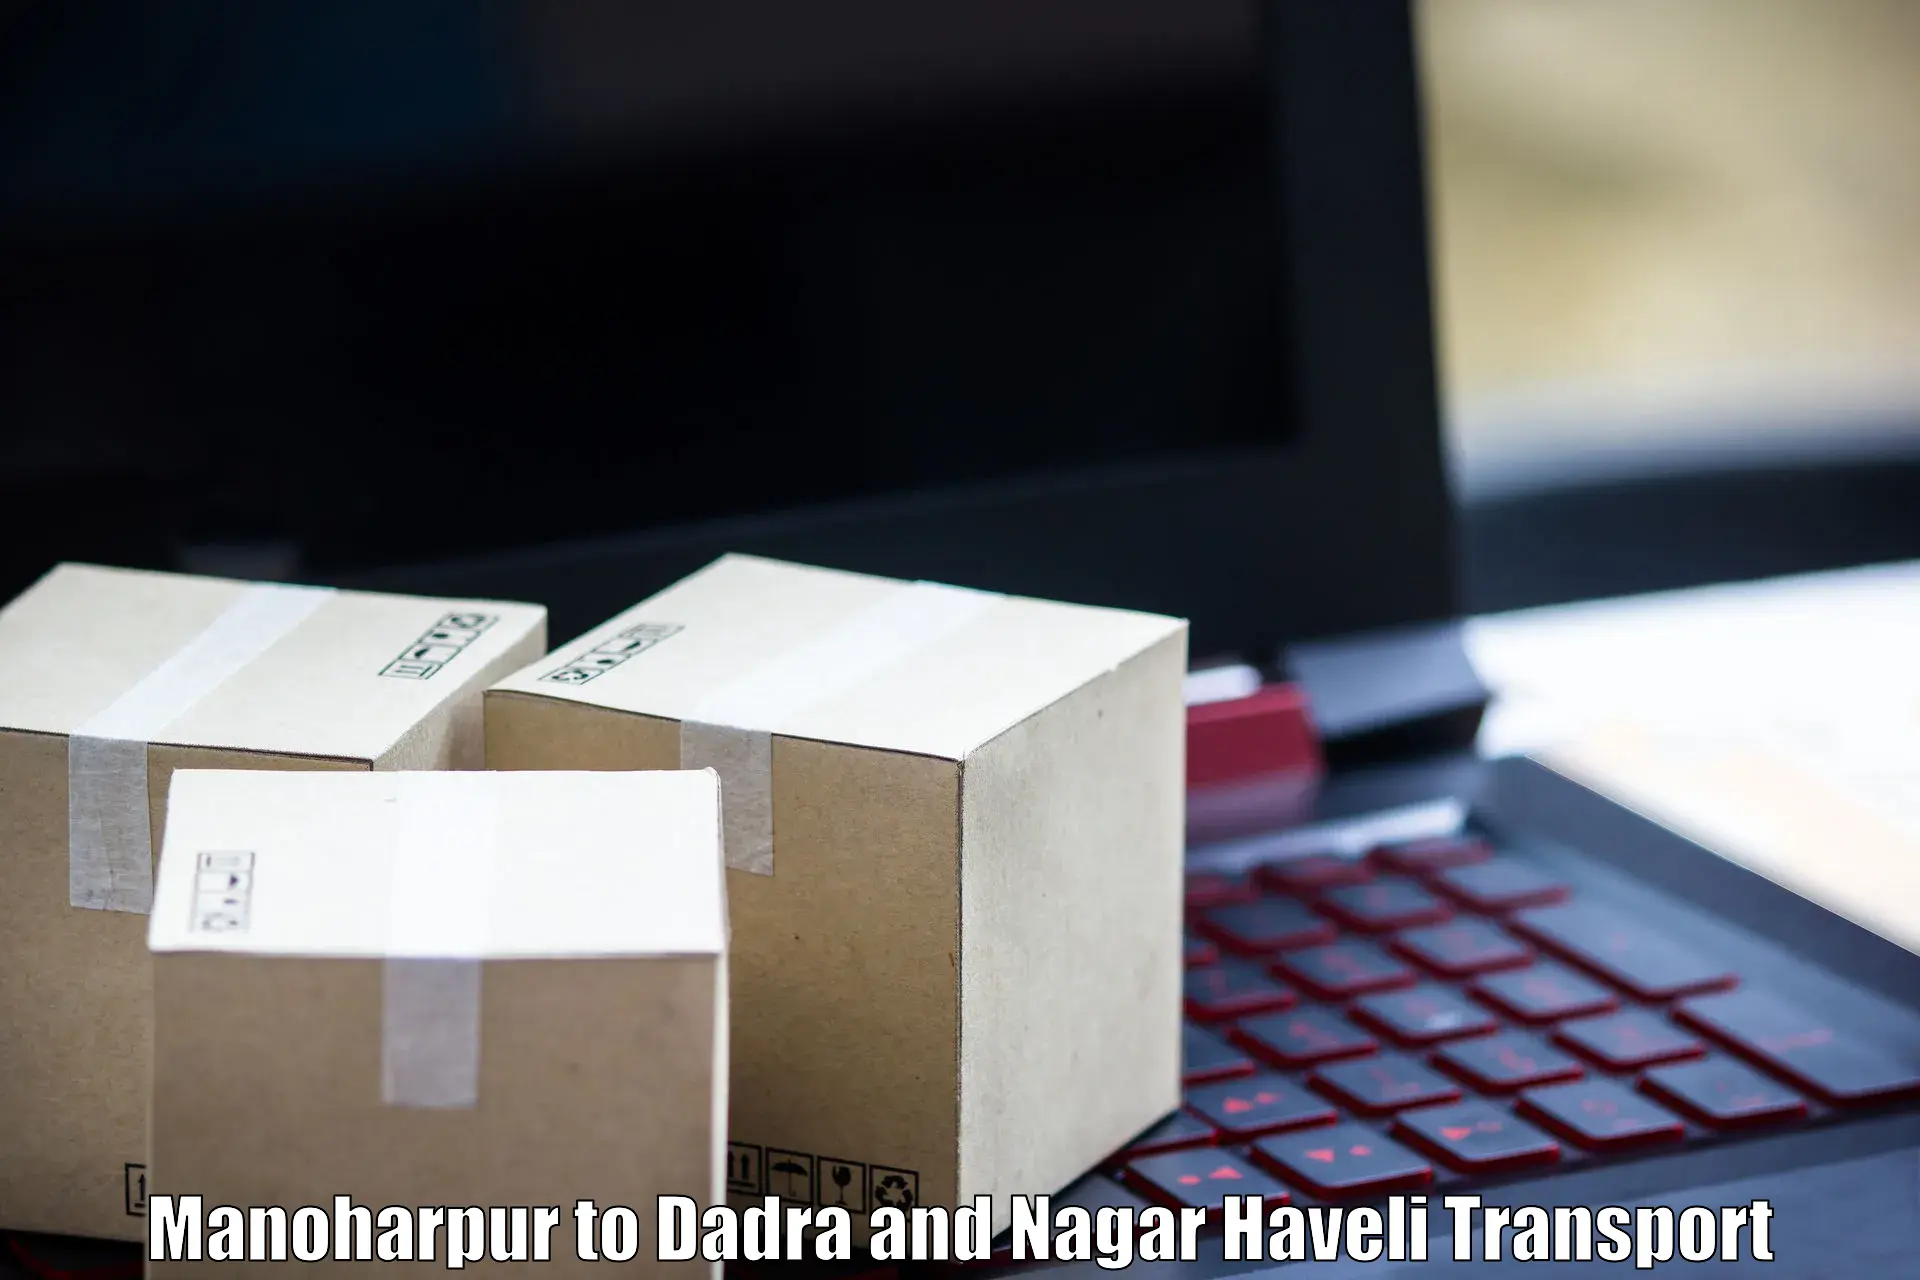 Air cargo transport services in Manoharpur to Dadra and Nagar Haveli